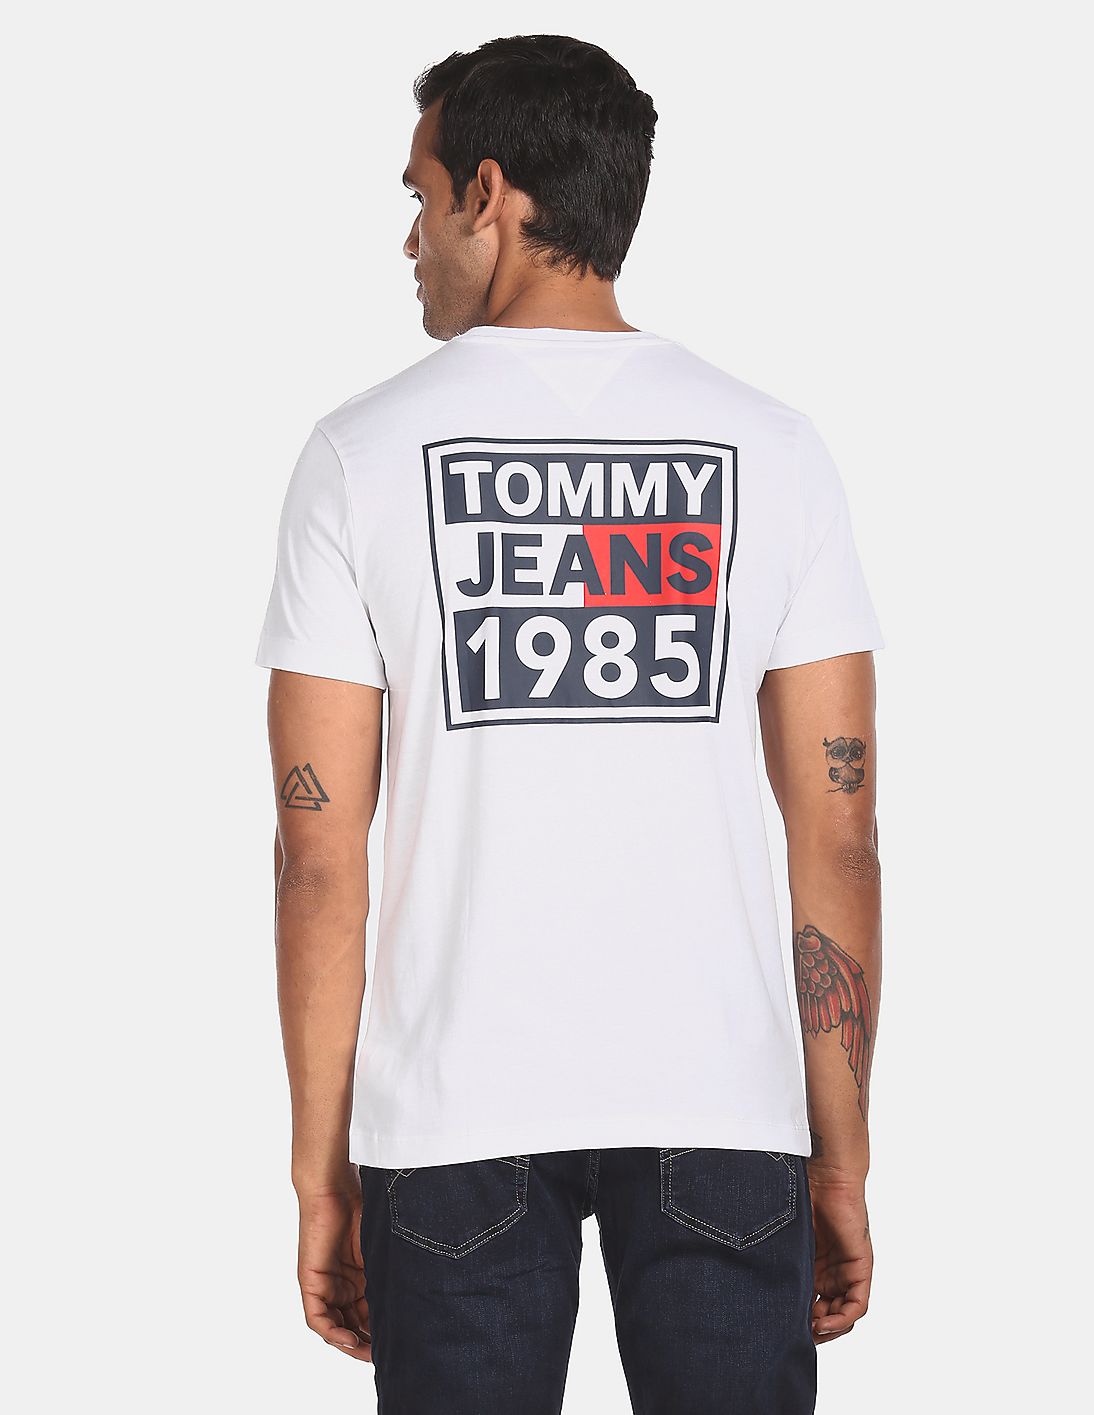 ÁO THUN TOMMY HILFIGER MEN WHITE COTTON FRONT AND BACK GRAPHIC PRINT T-SHIRT 8